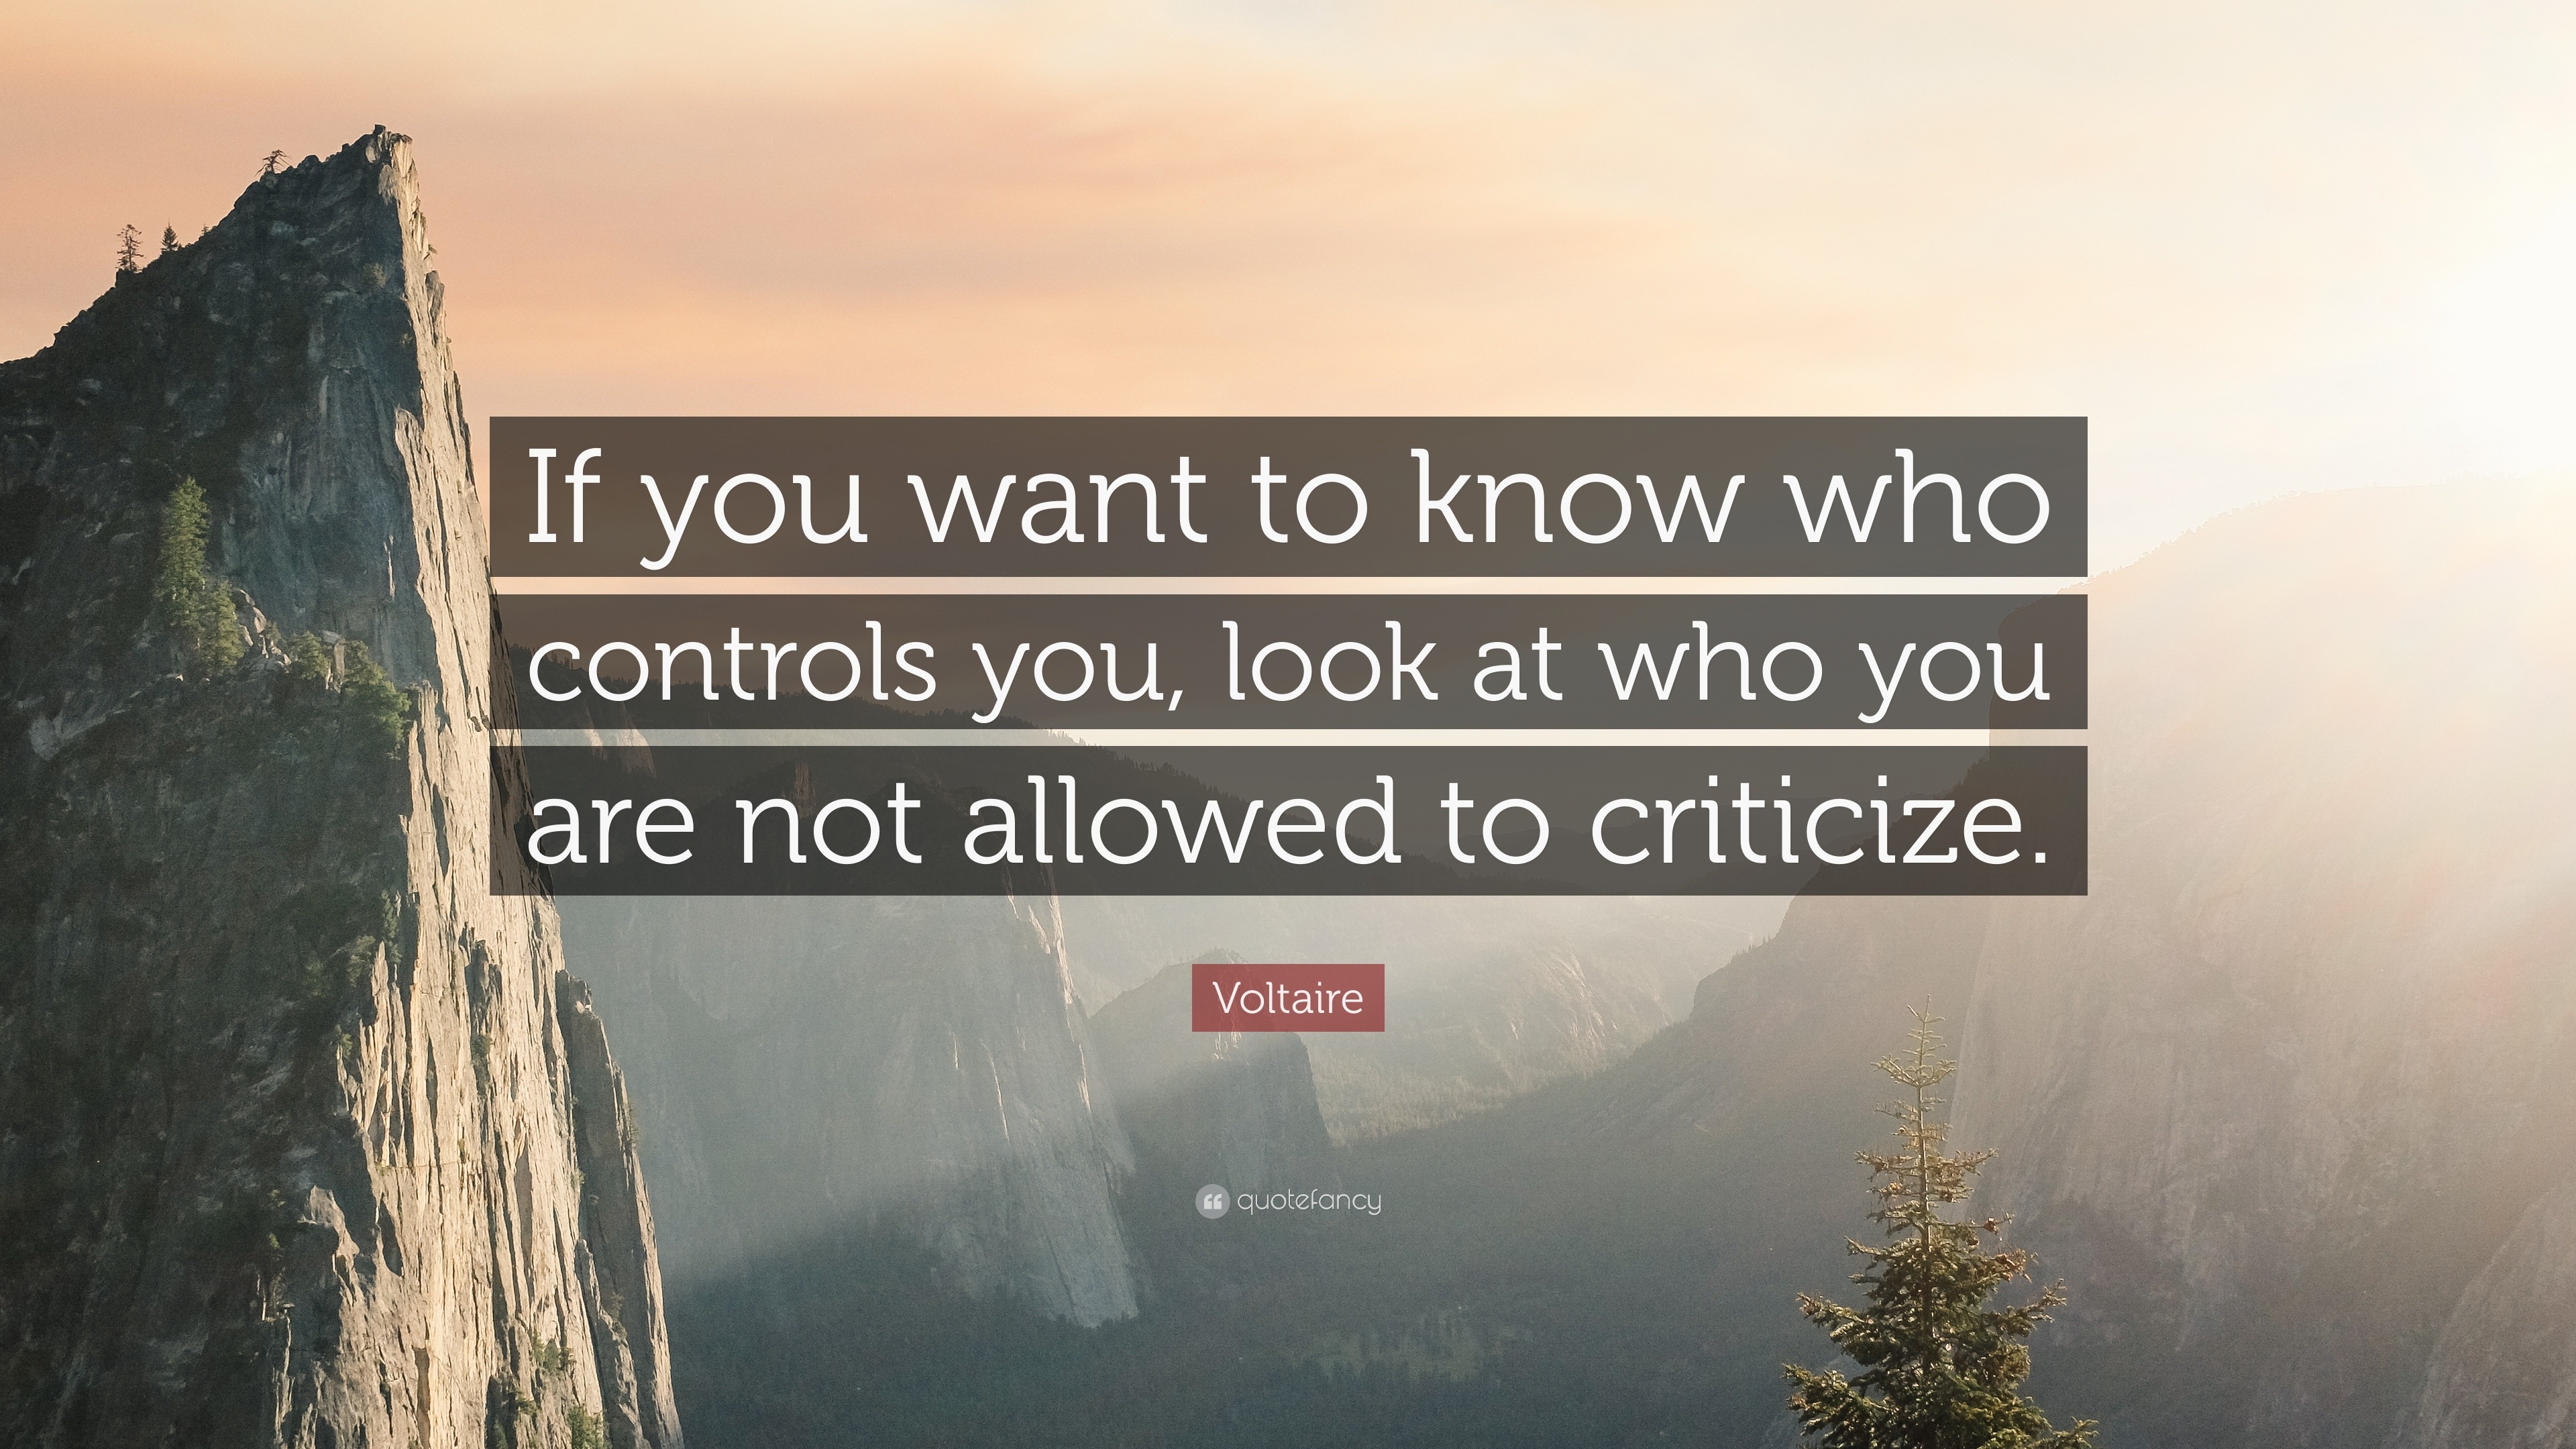 Voltaire Quote: “If you want to know who controls you, look at who you